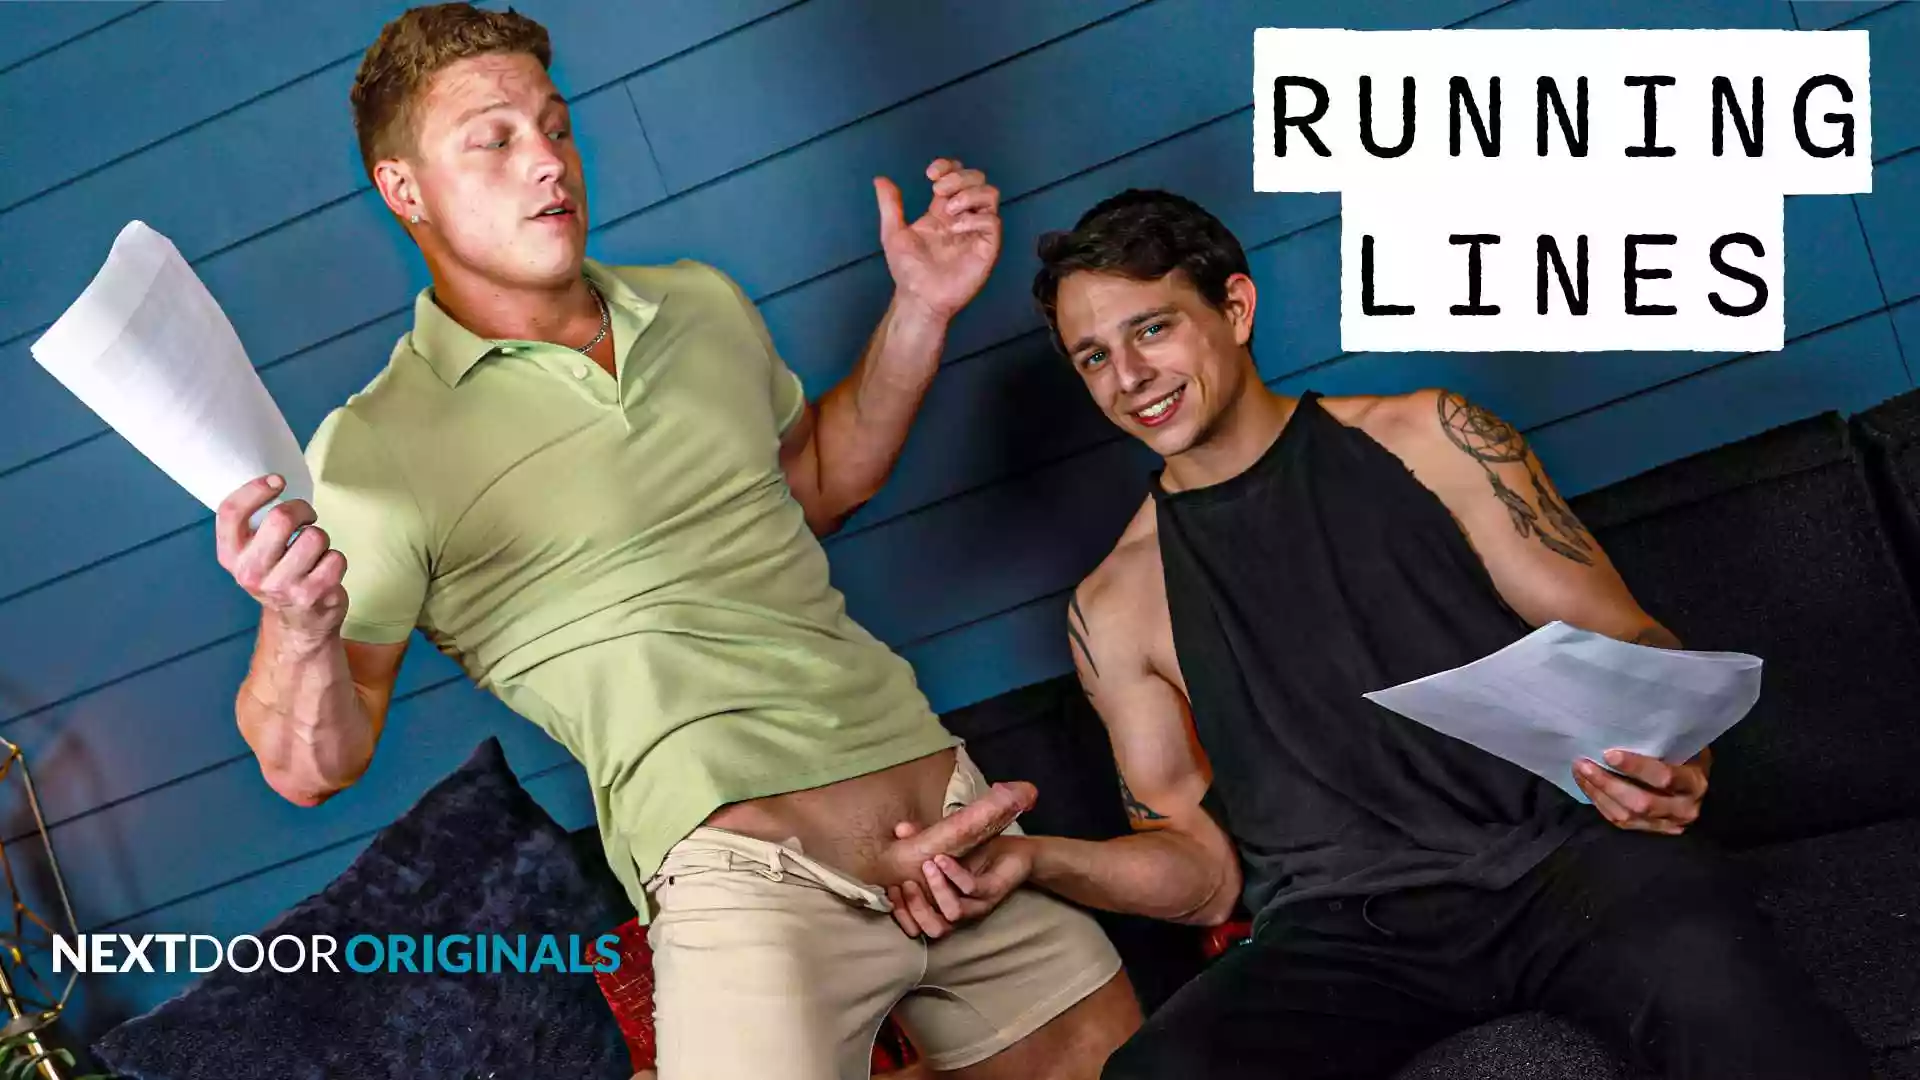 Running Lines – Kyle Wyncrest and Logan Aarons